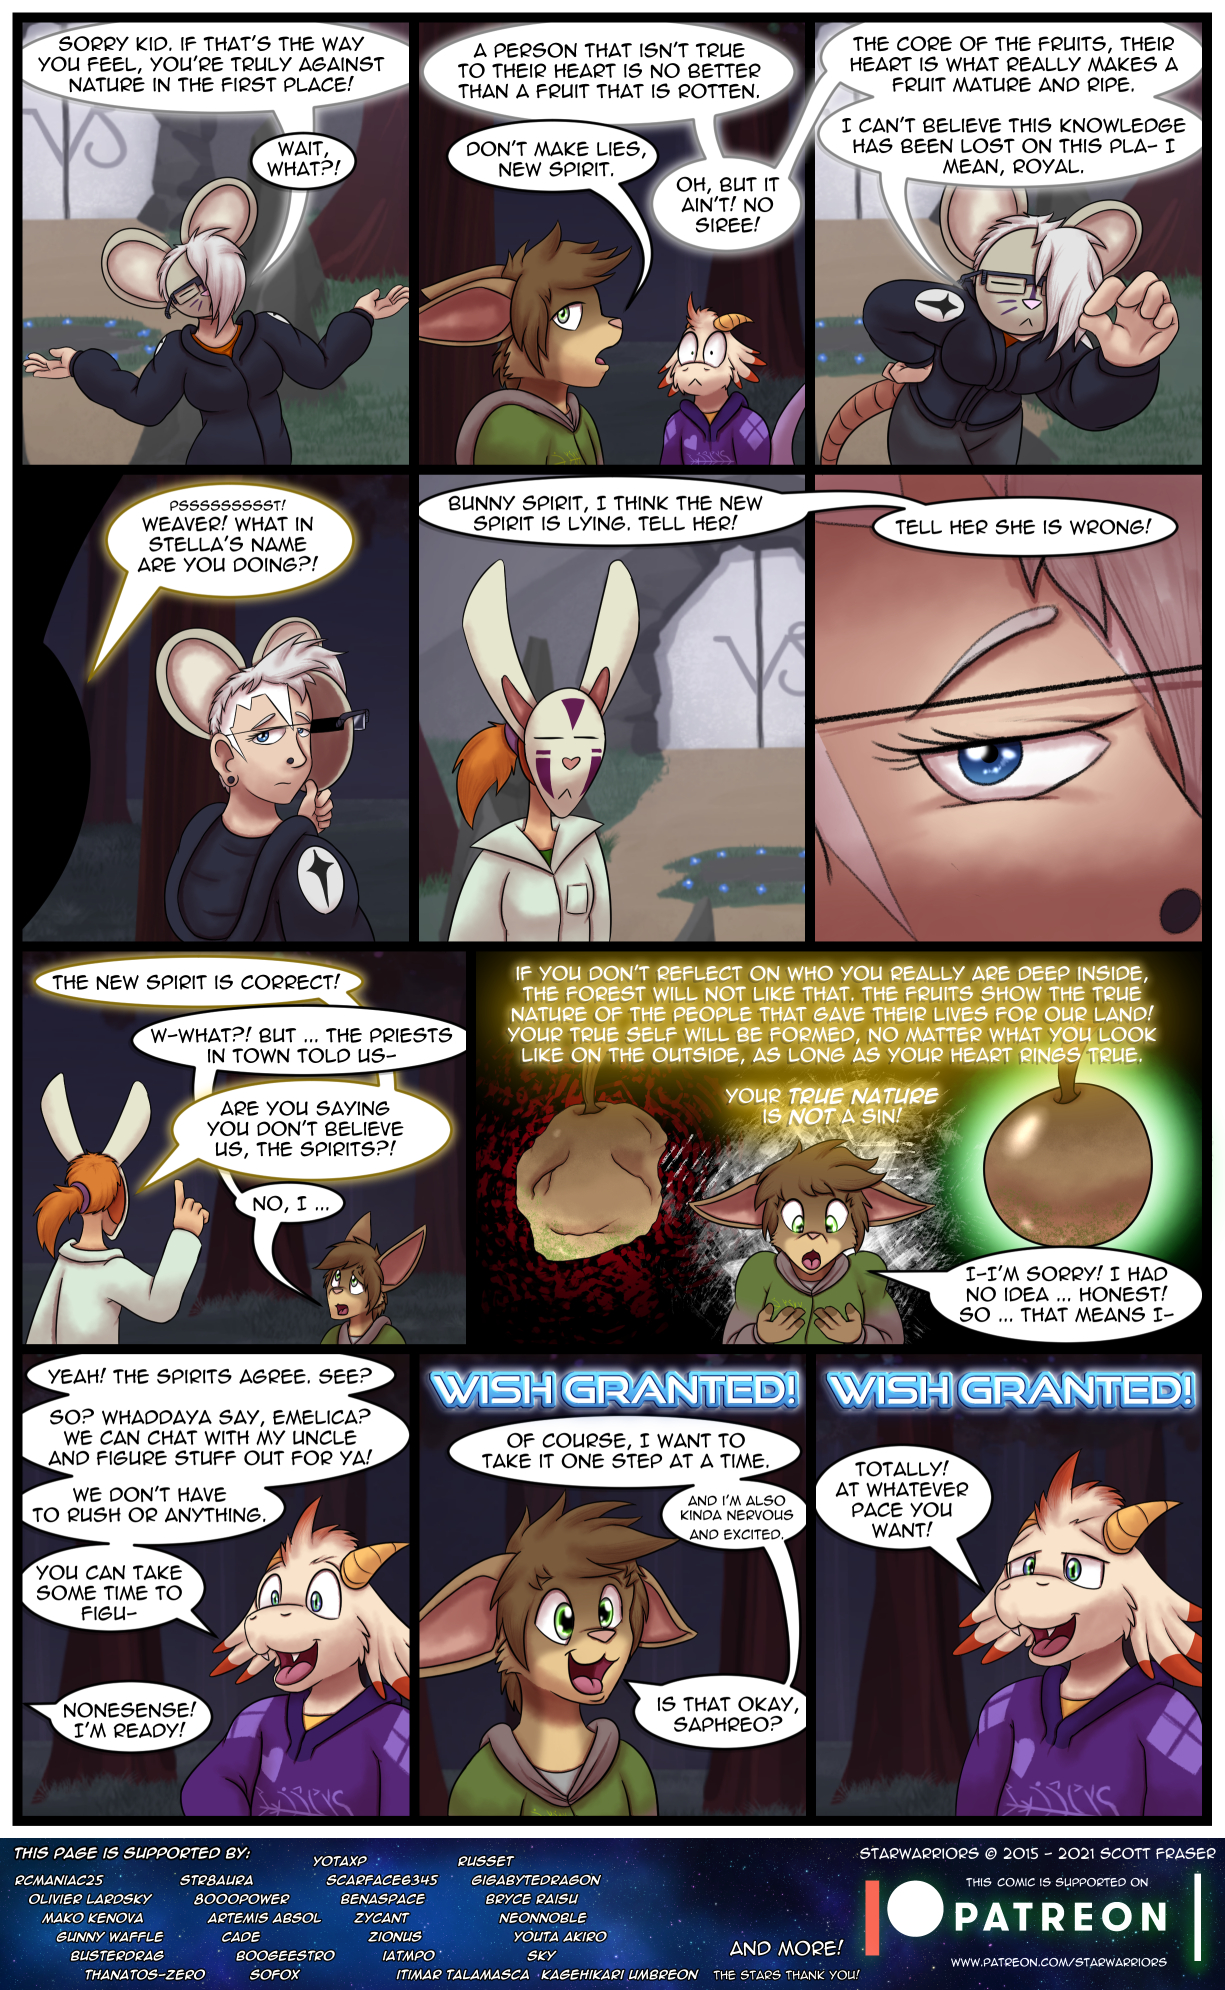 Ch5 Page 29 – True Nature